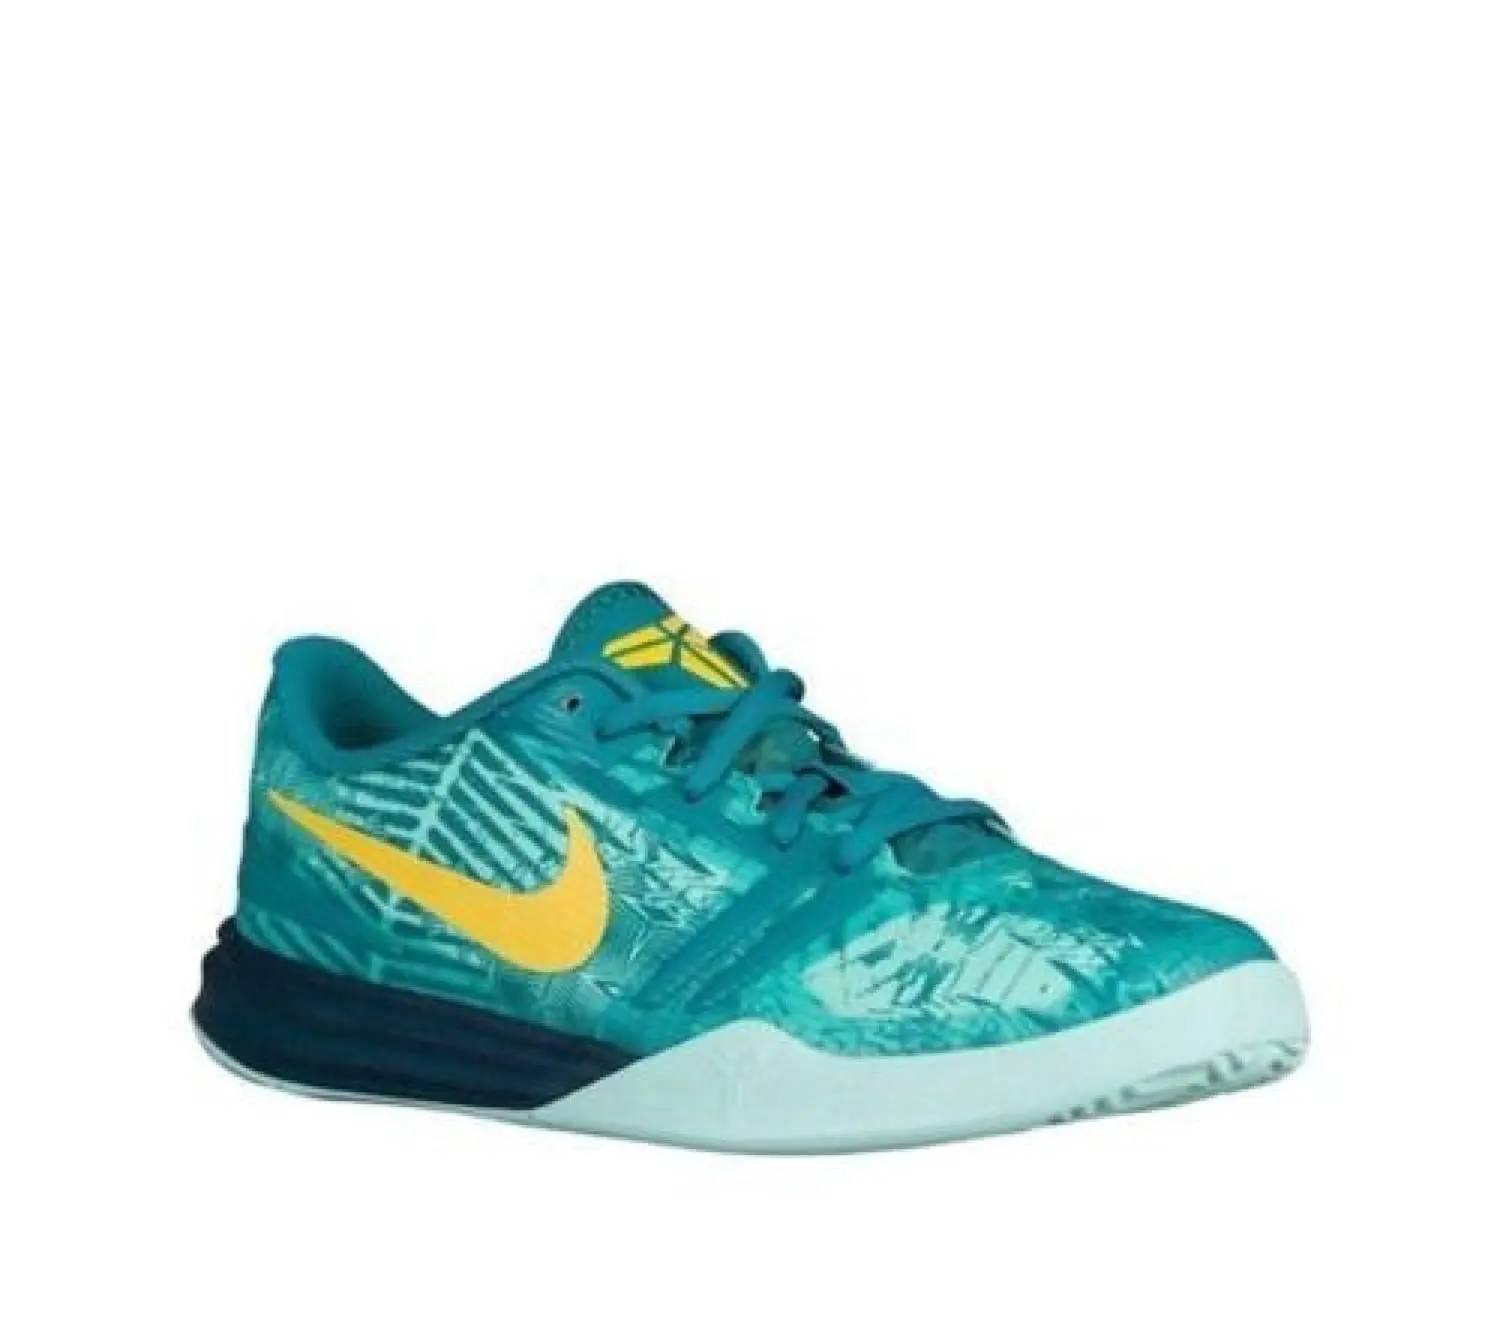 kobe bryant low top basketball shoes